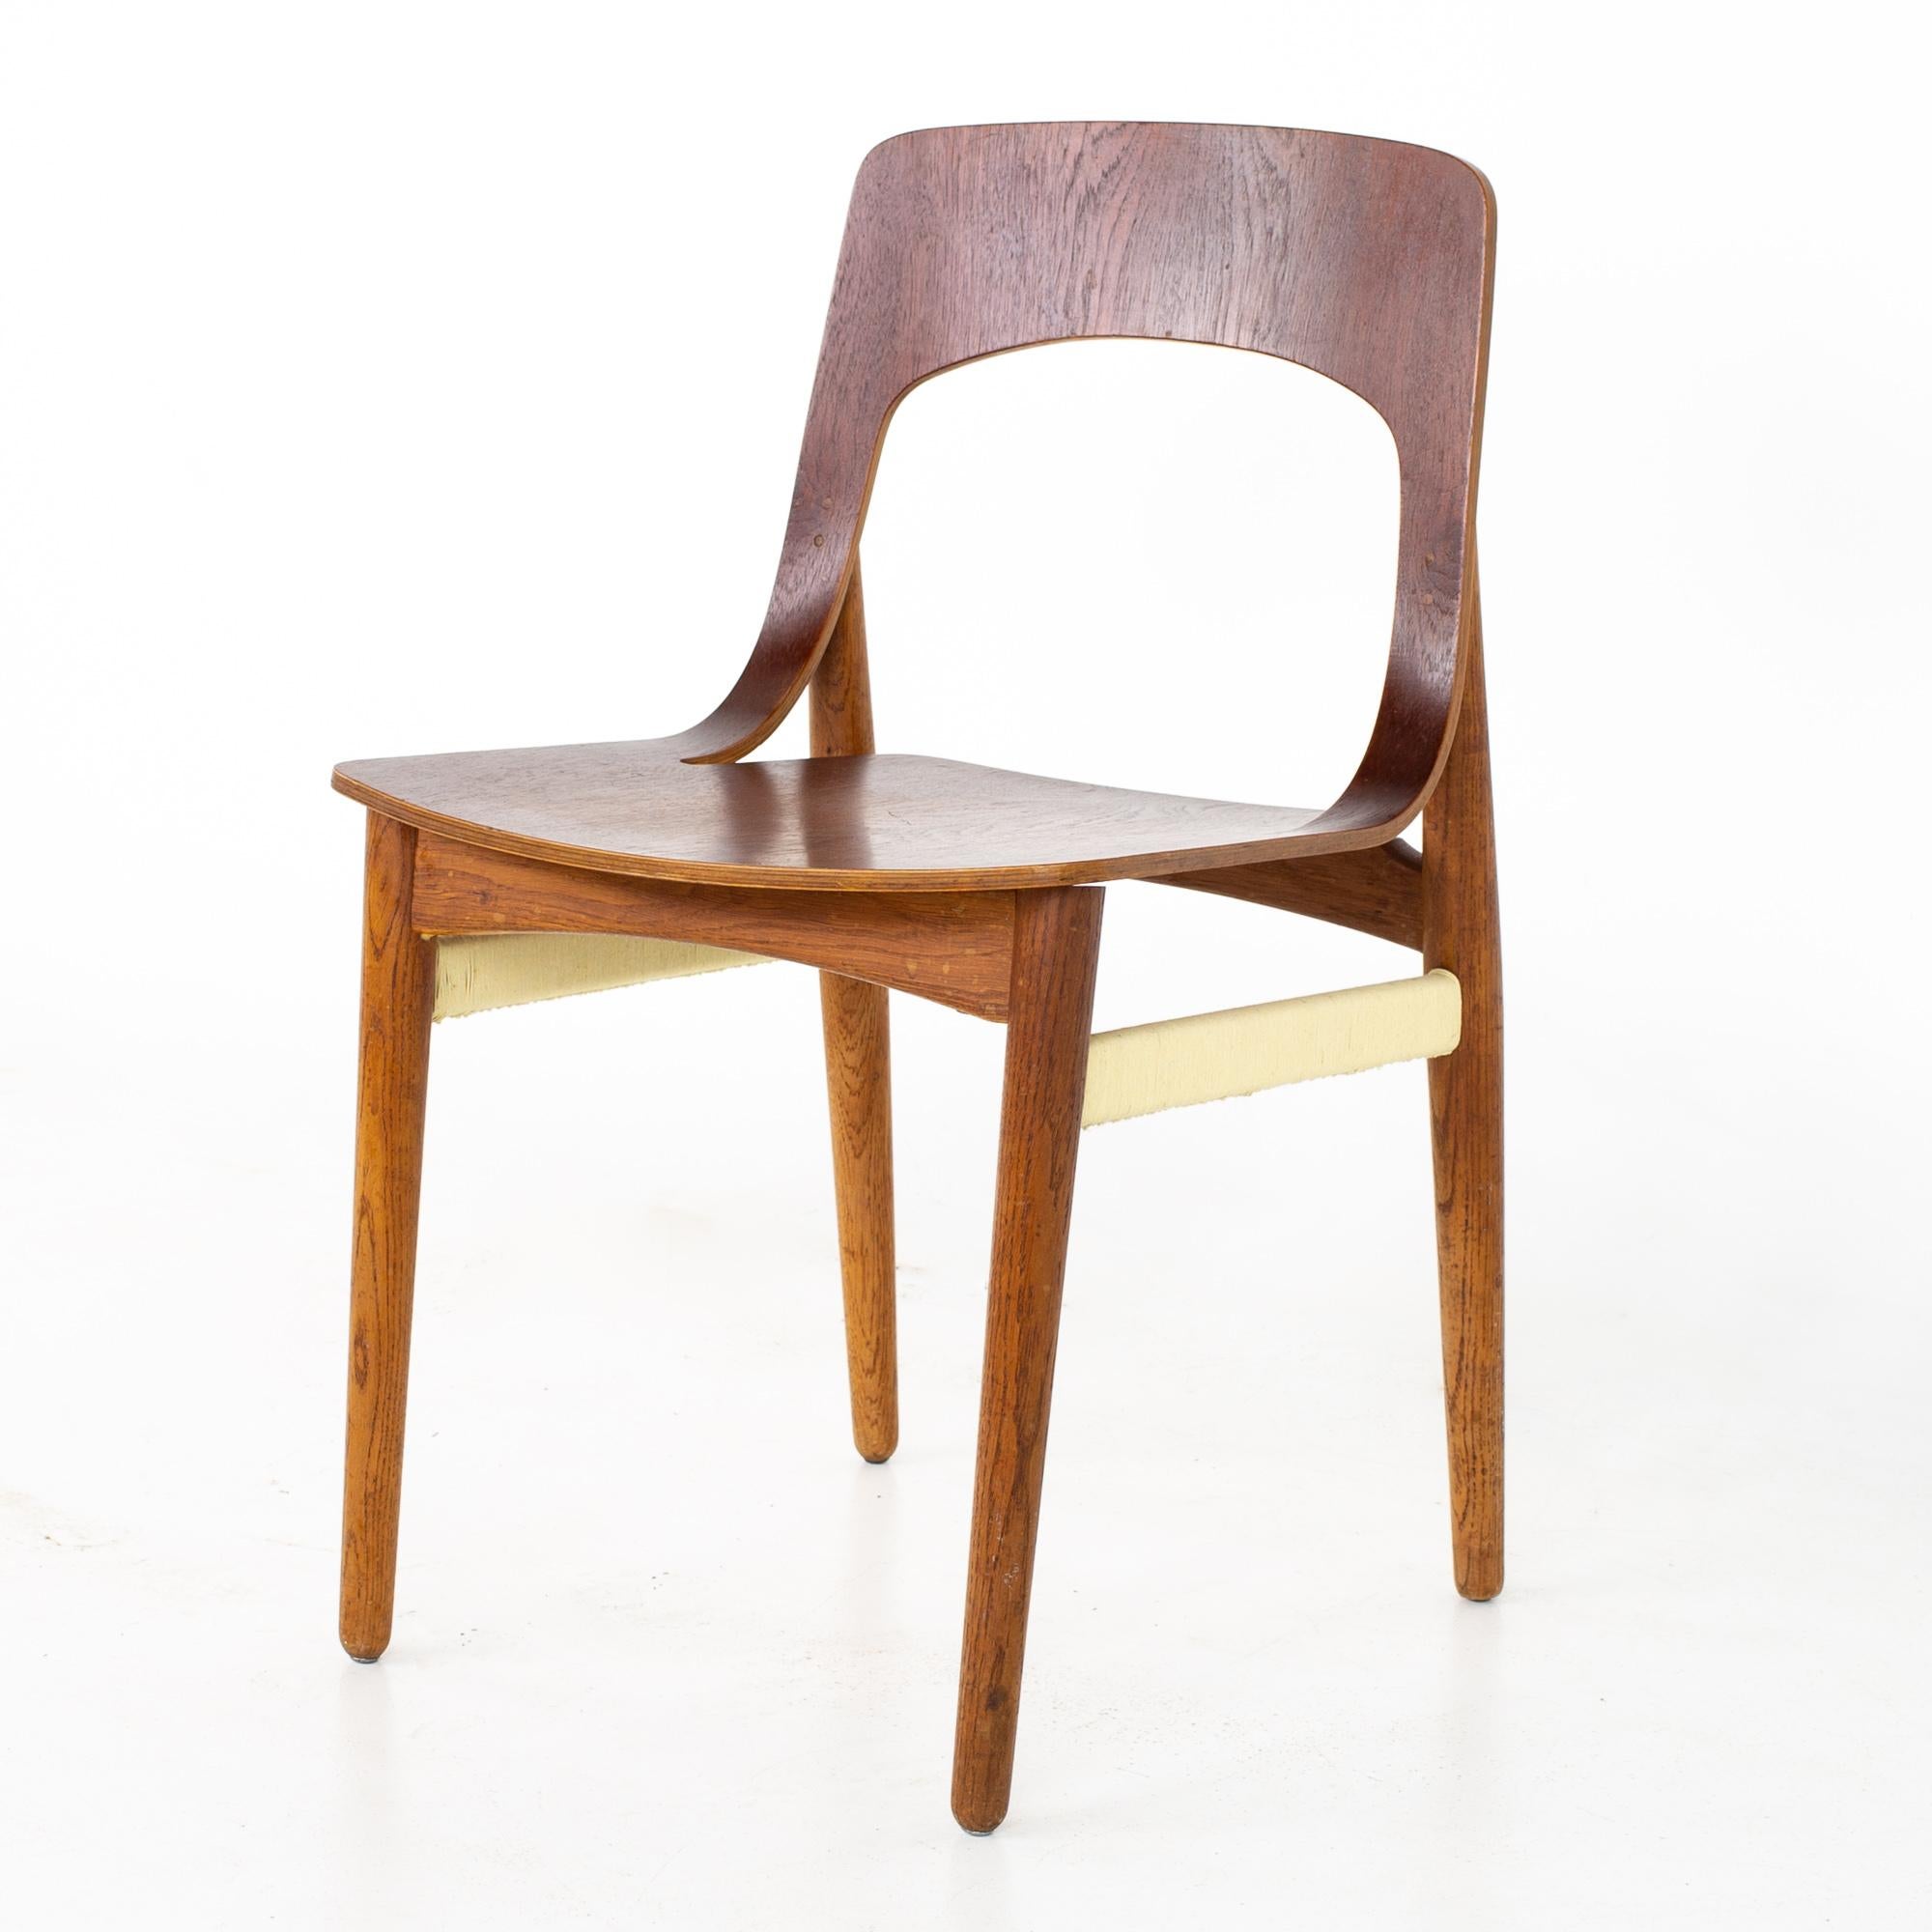 Mid century Danish teak roped bentwood dining side chair
Chair measures: 17 wide x 16 deep x 30.5 high, with a seat height of 17.5 inches 

All pieces of furniture can be had in what we call restored vintage condition. That means the piece is